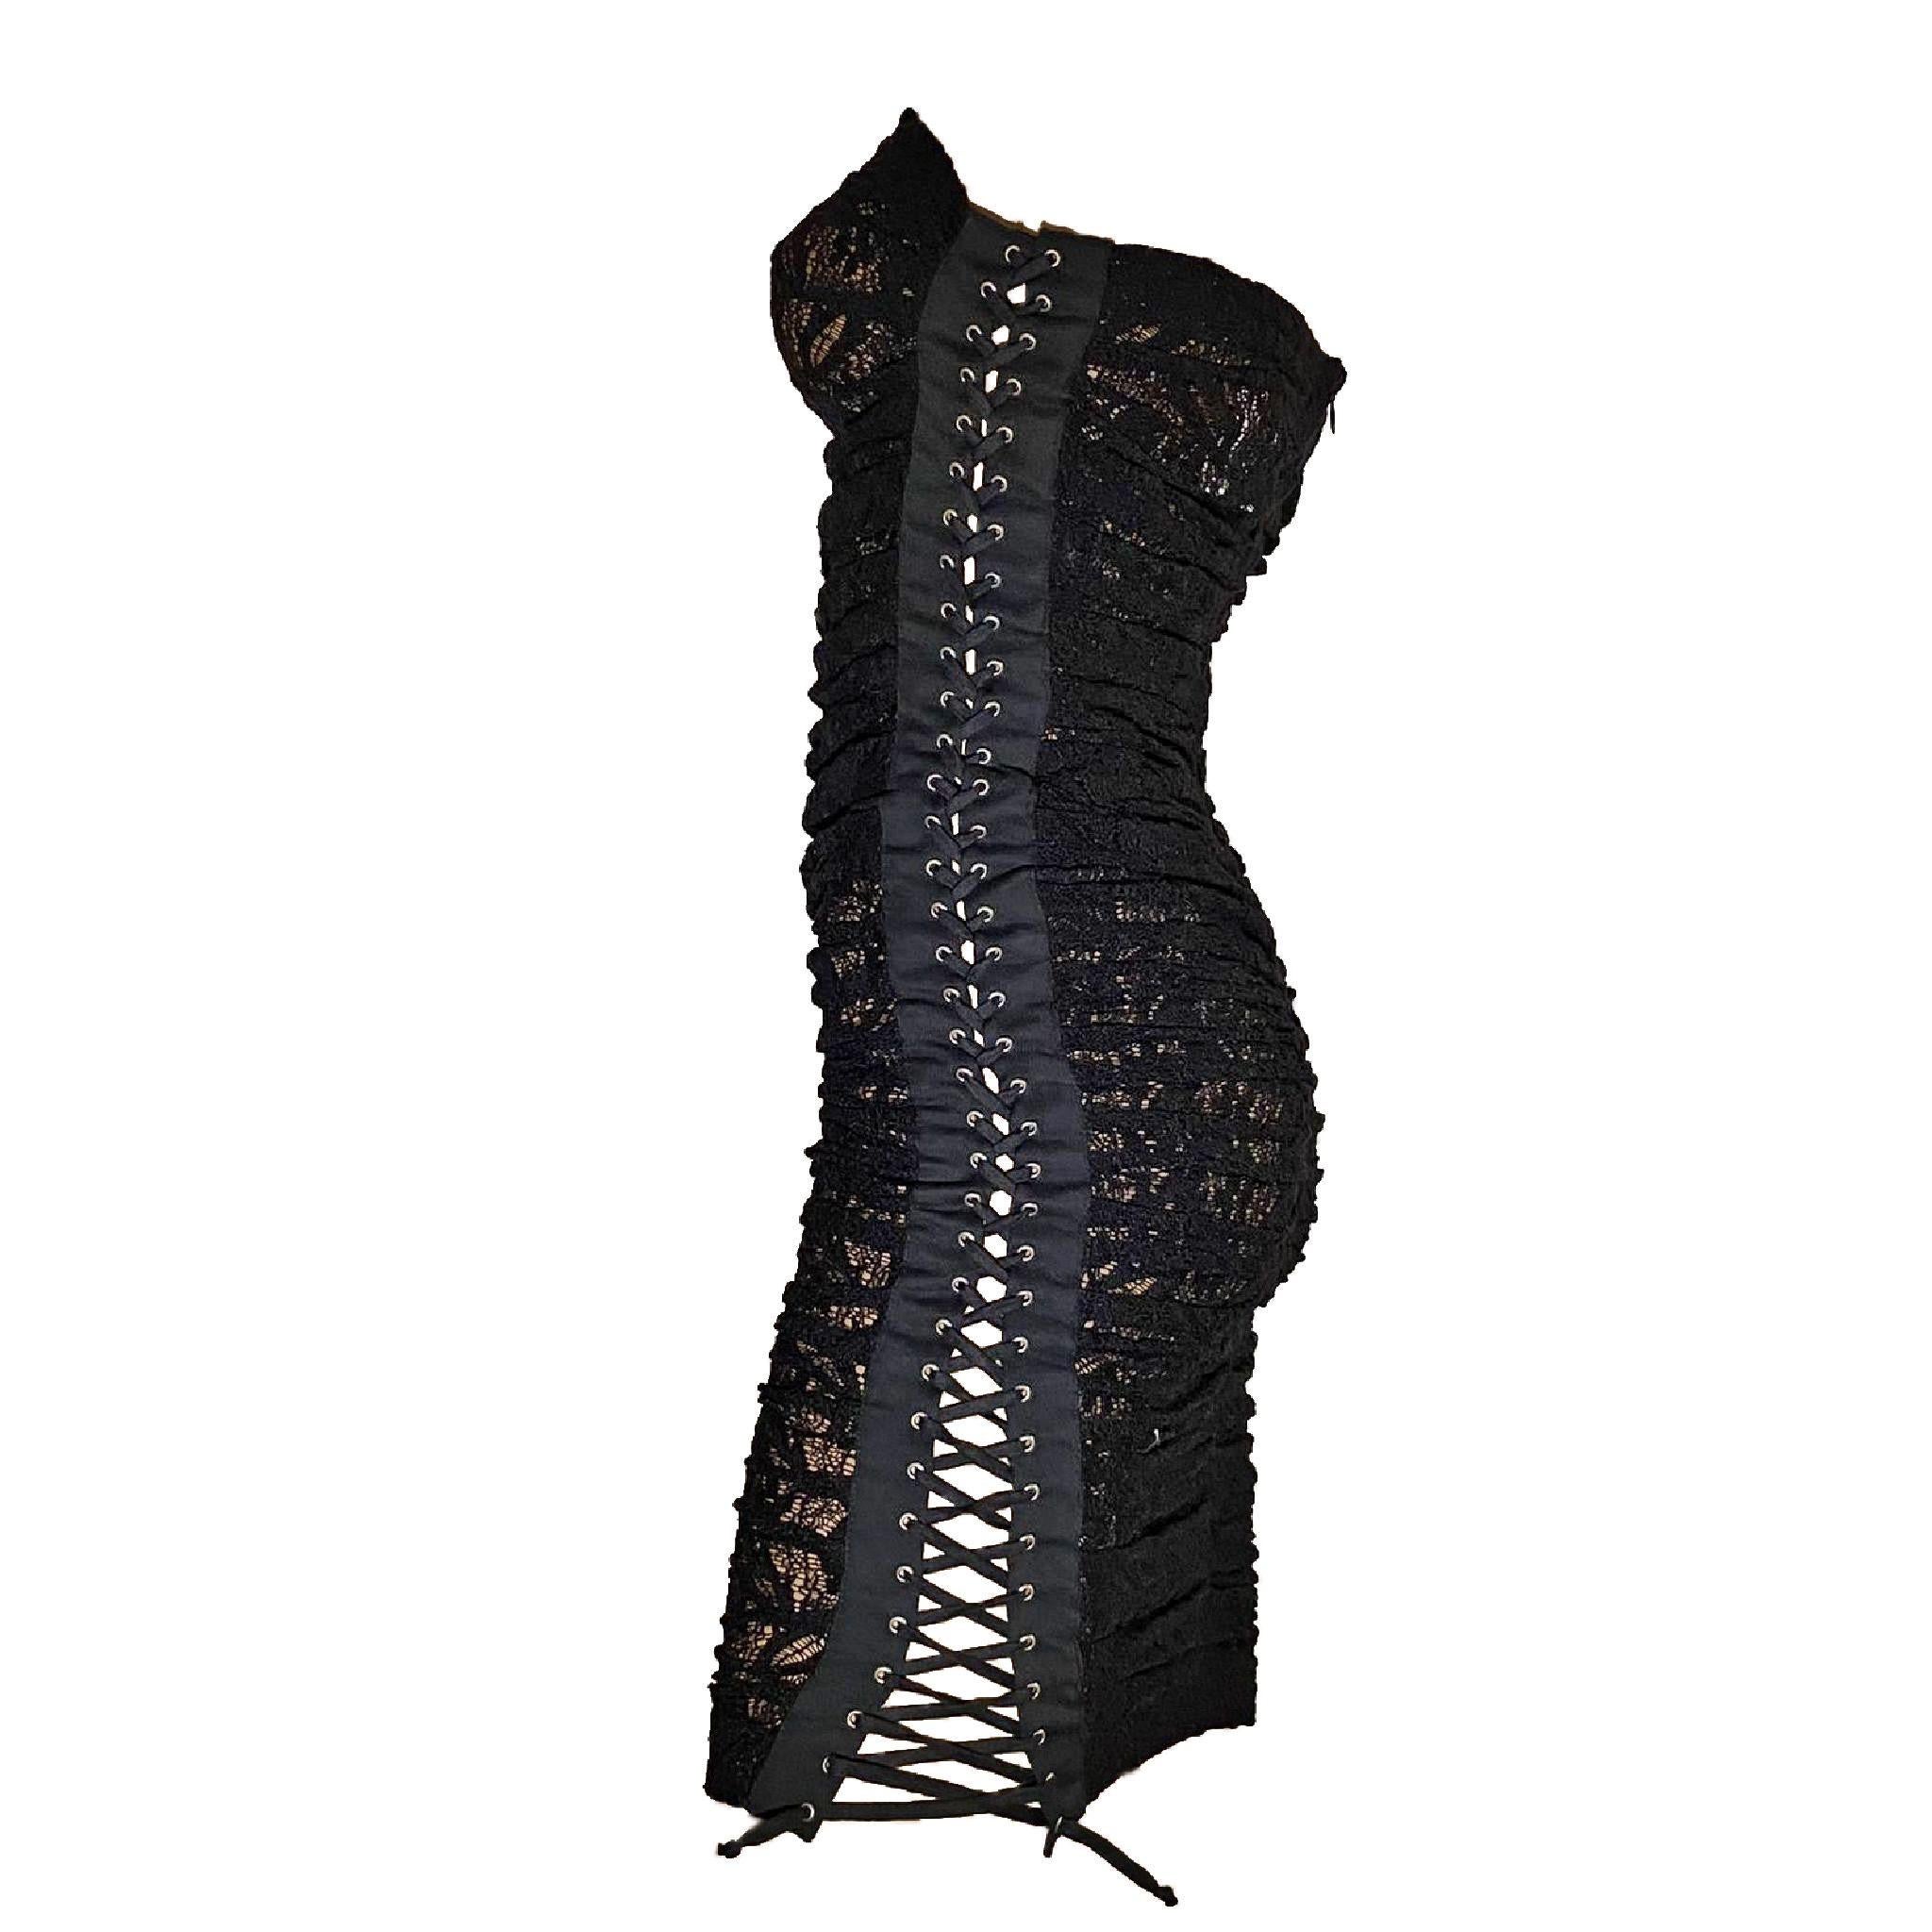 Black D&G S/S 2007 black lace sexy lace up mini dress (New with tags)